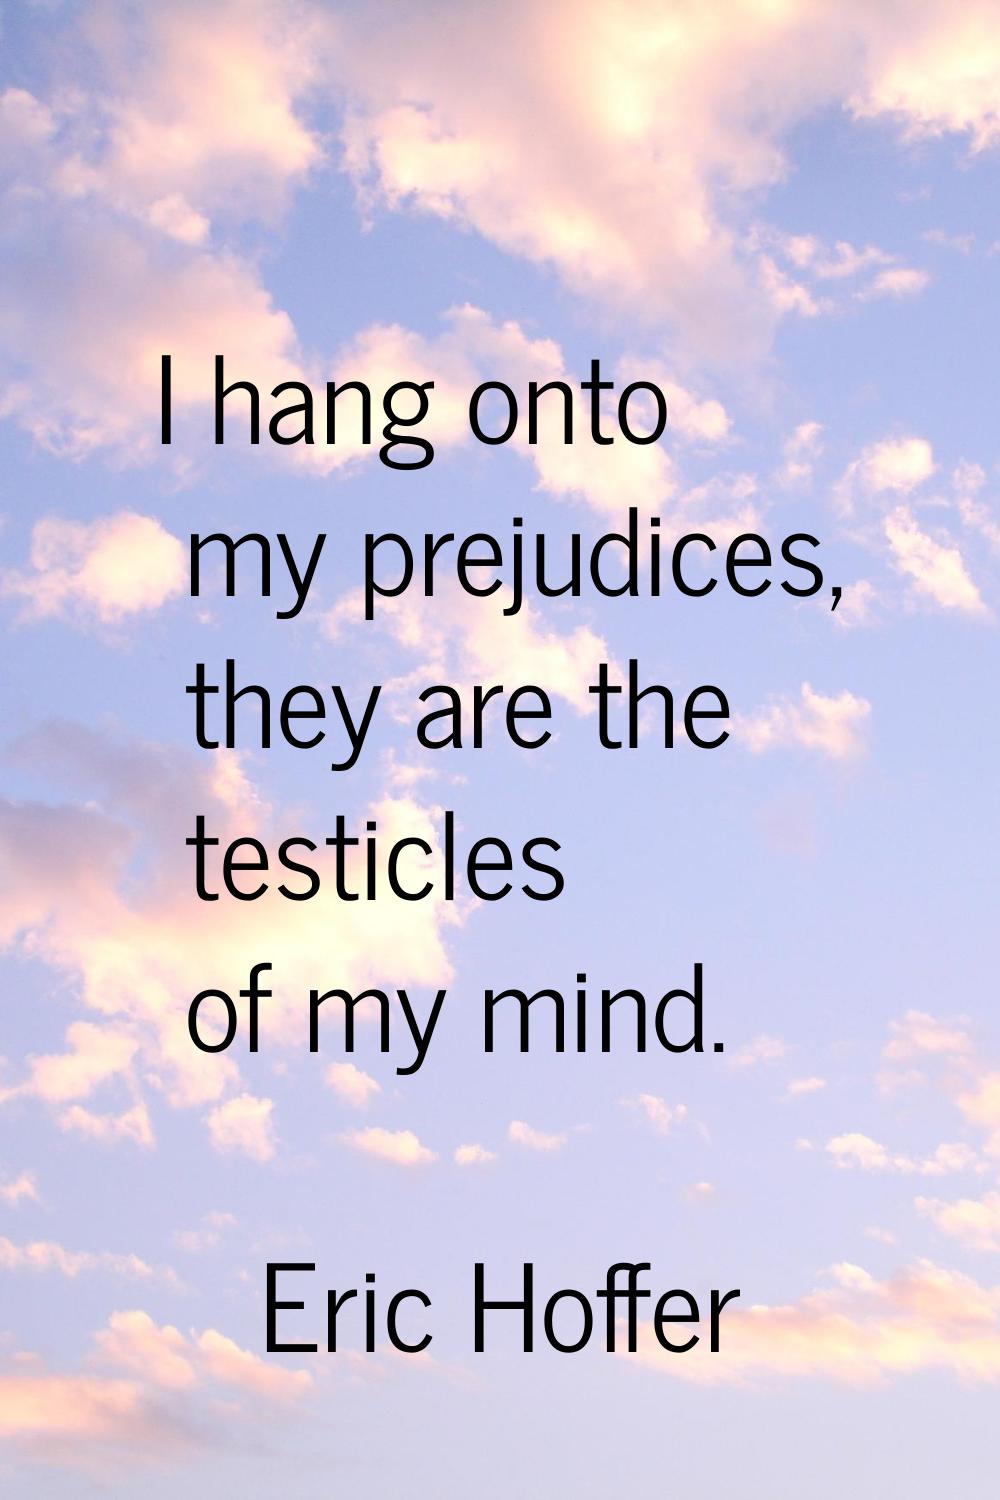 I hang onto my prejudices, they are the testicles of my mind.